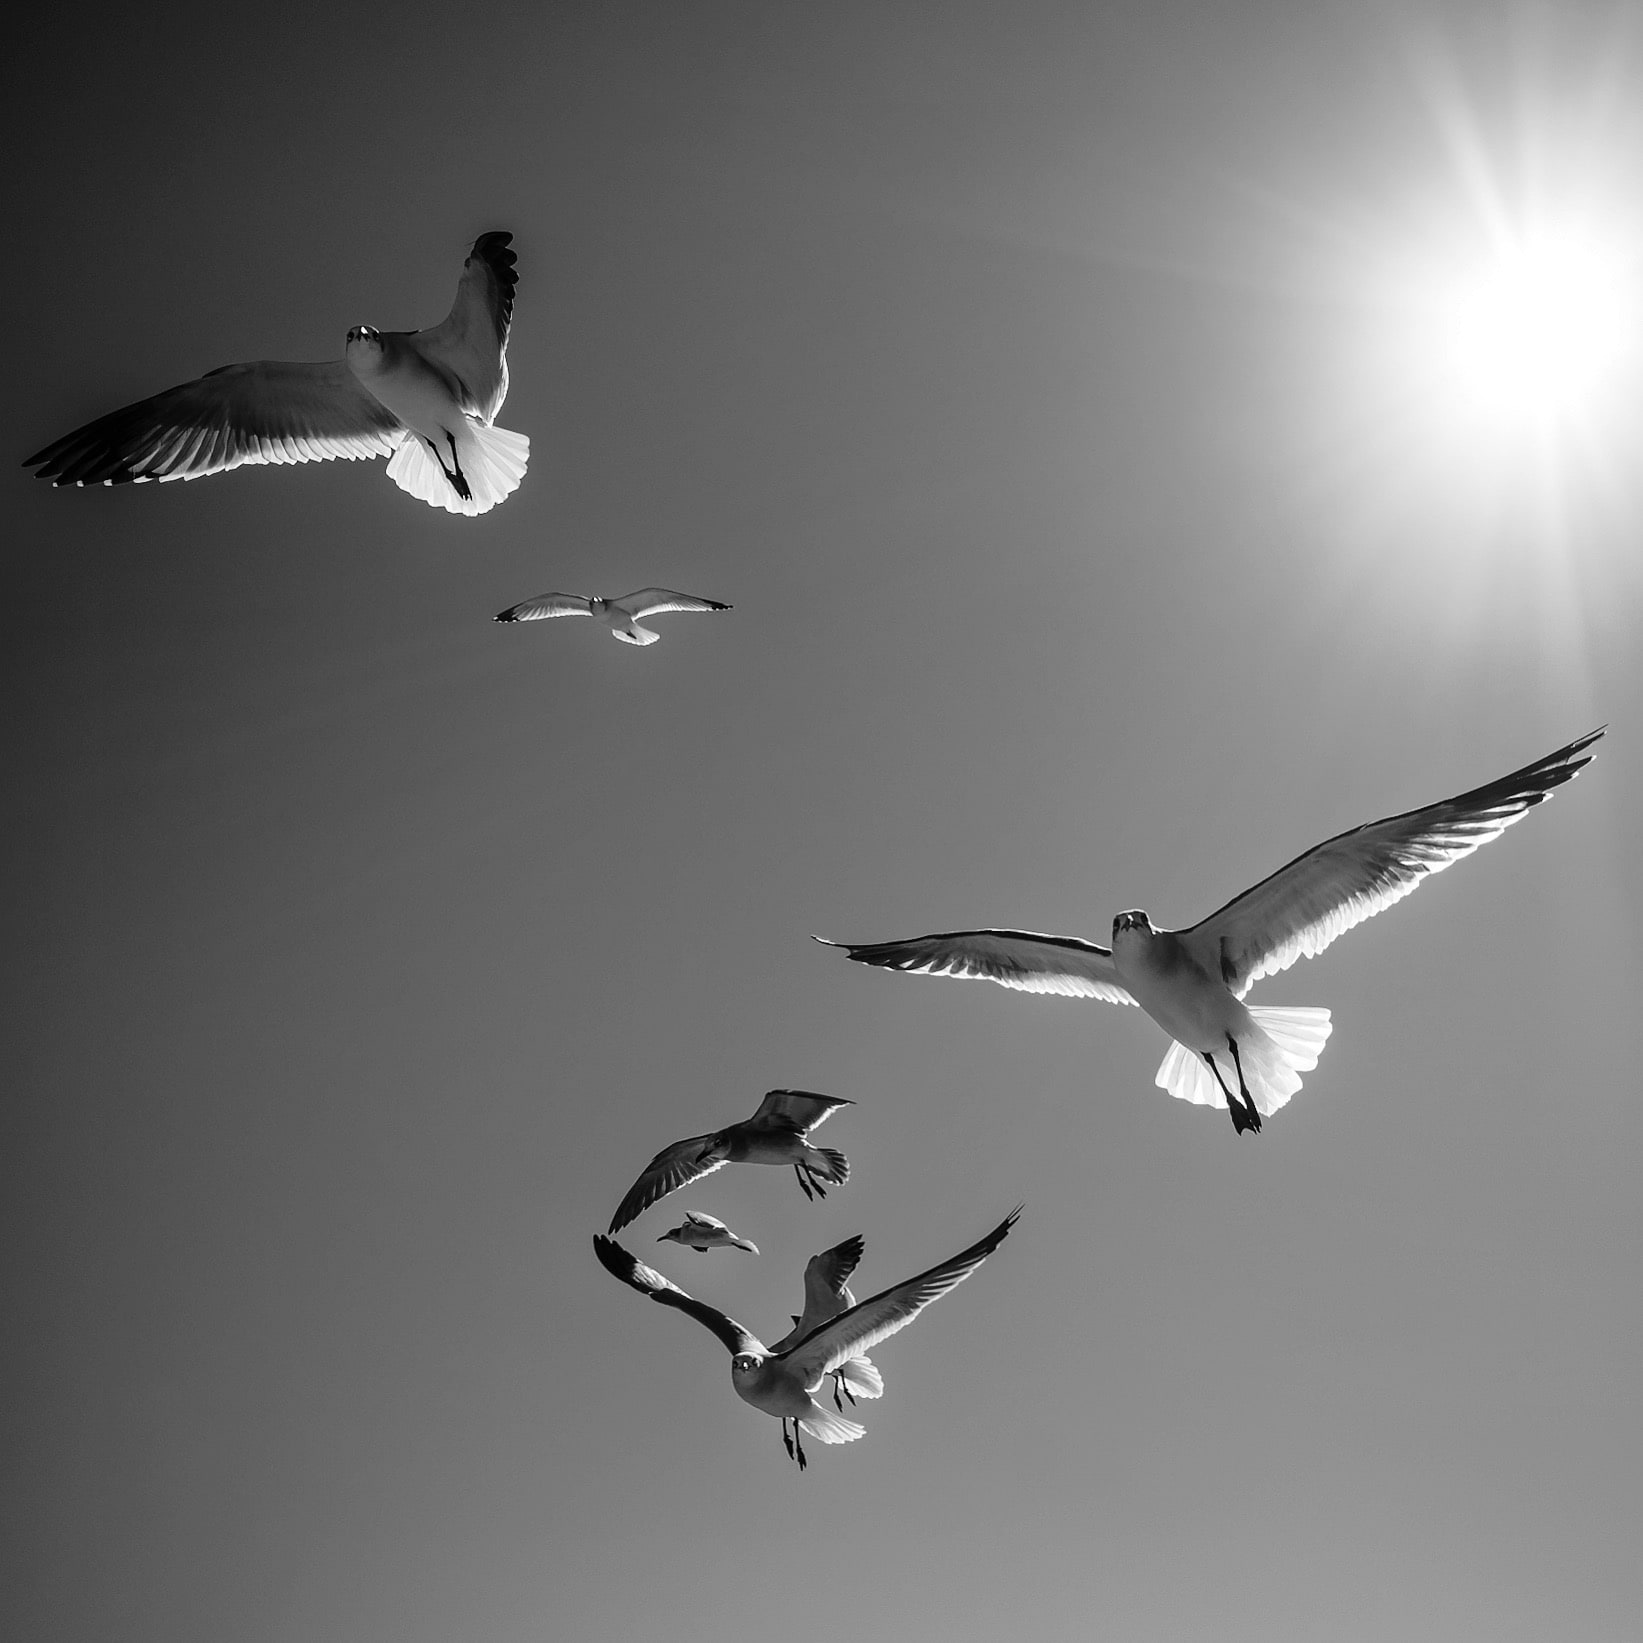 A group of 7 gulls, flying in the air, with the sun beaming from behind. Monochrome.